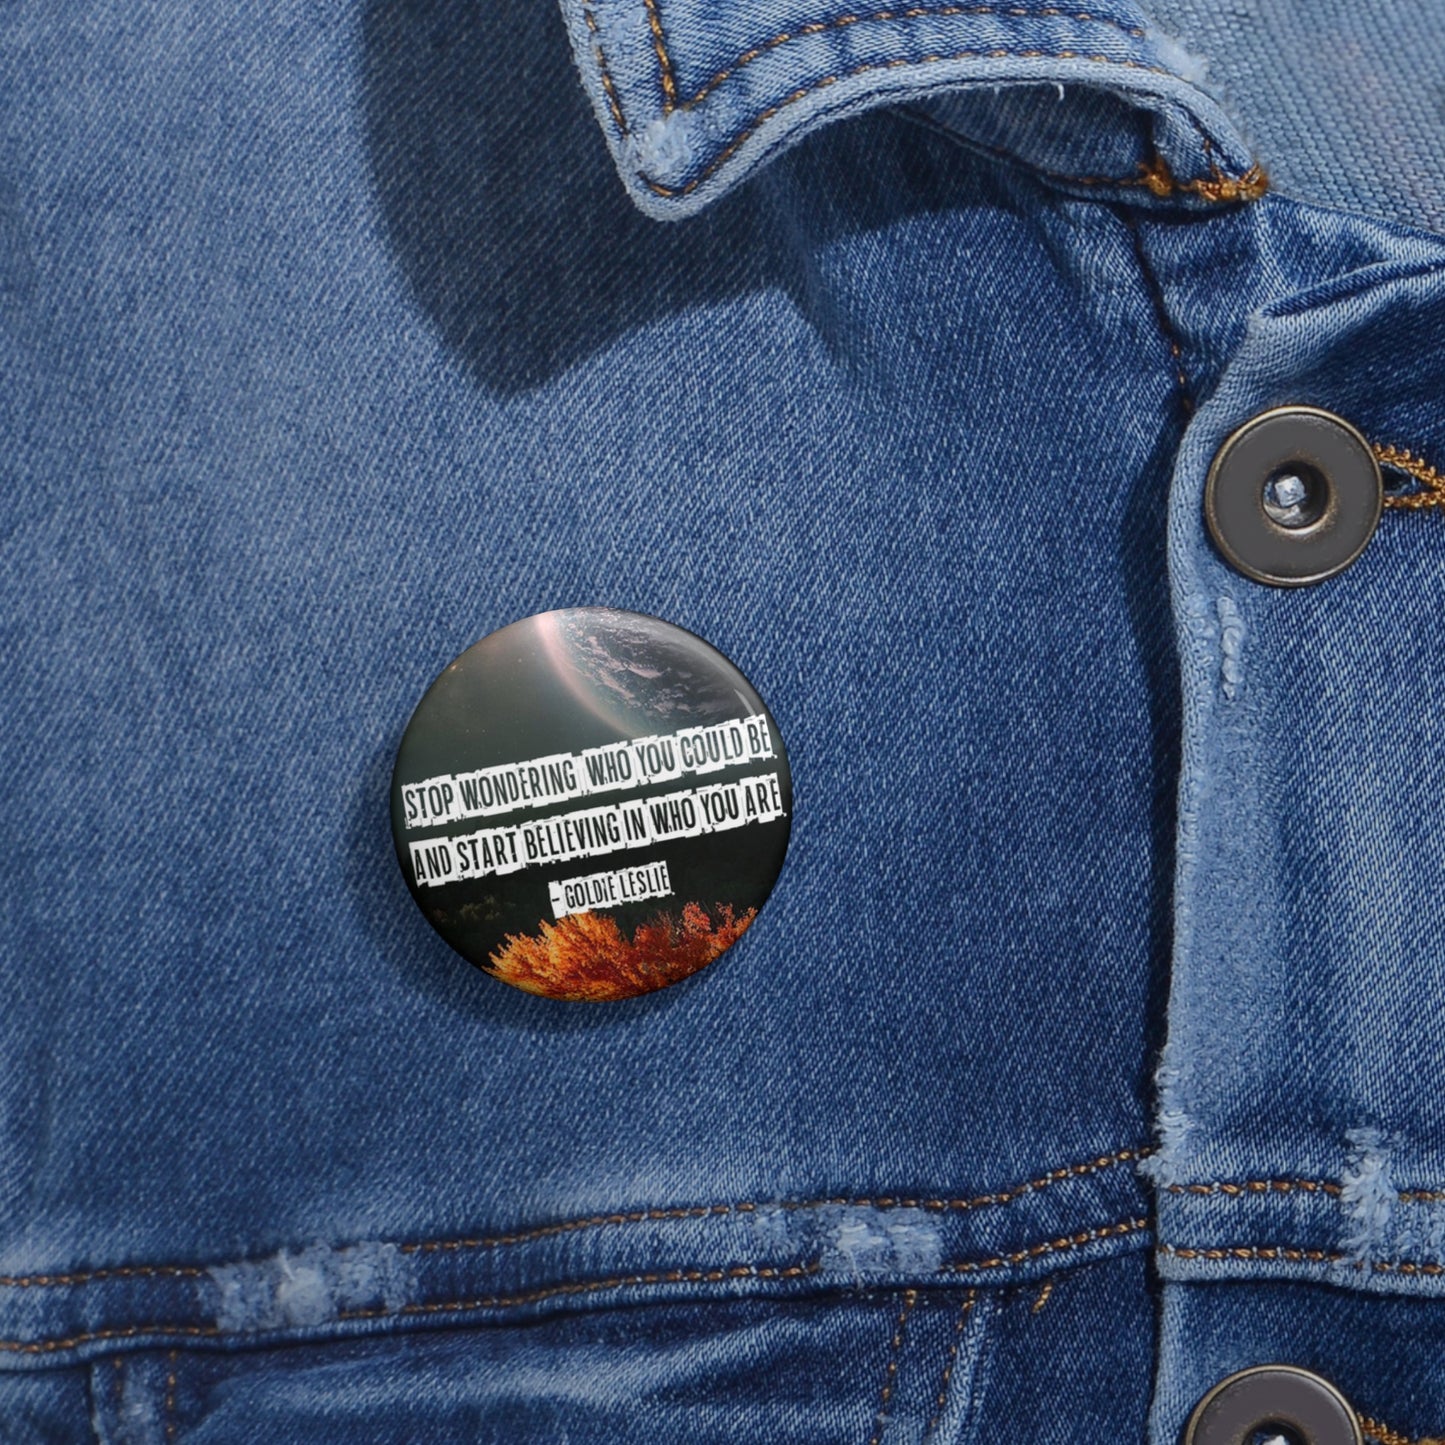 Growth is key -  Pin Buttons